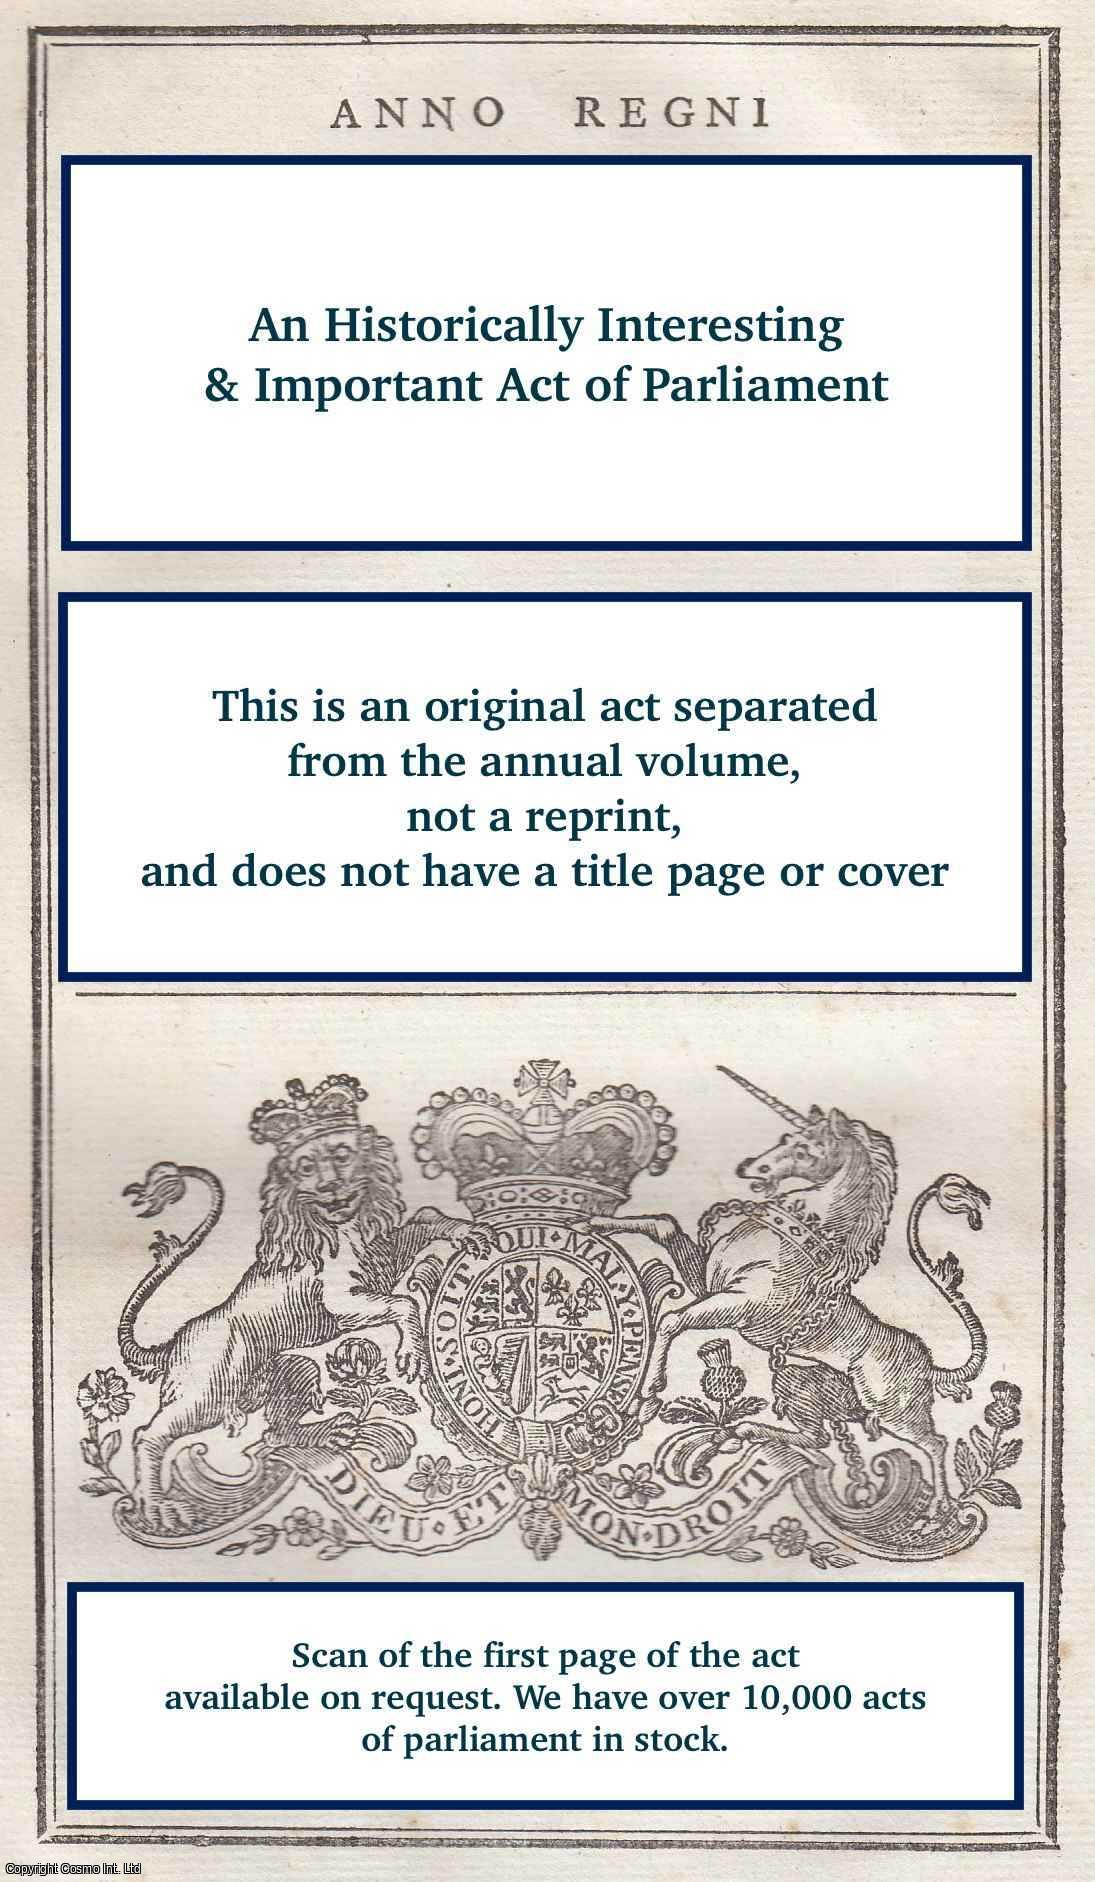 King George III - Cap XXVI. An Act for Duties of Customs on The Goods, Wares, and Merchandise therein Enumerated, in Furtherance of The Provisions of certain Orders in Council. 1808.